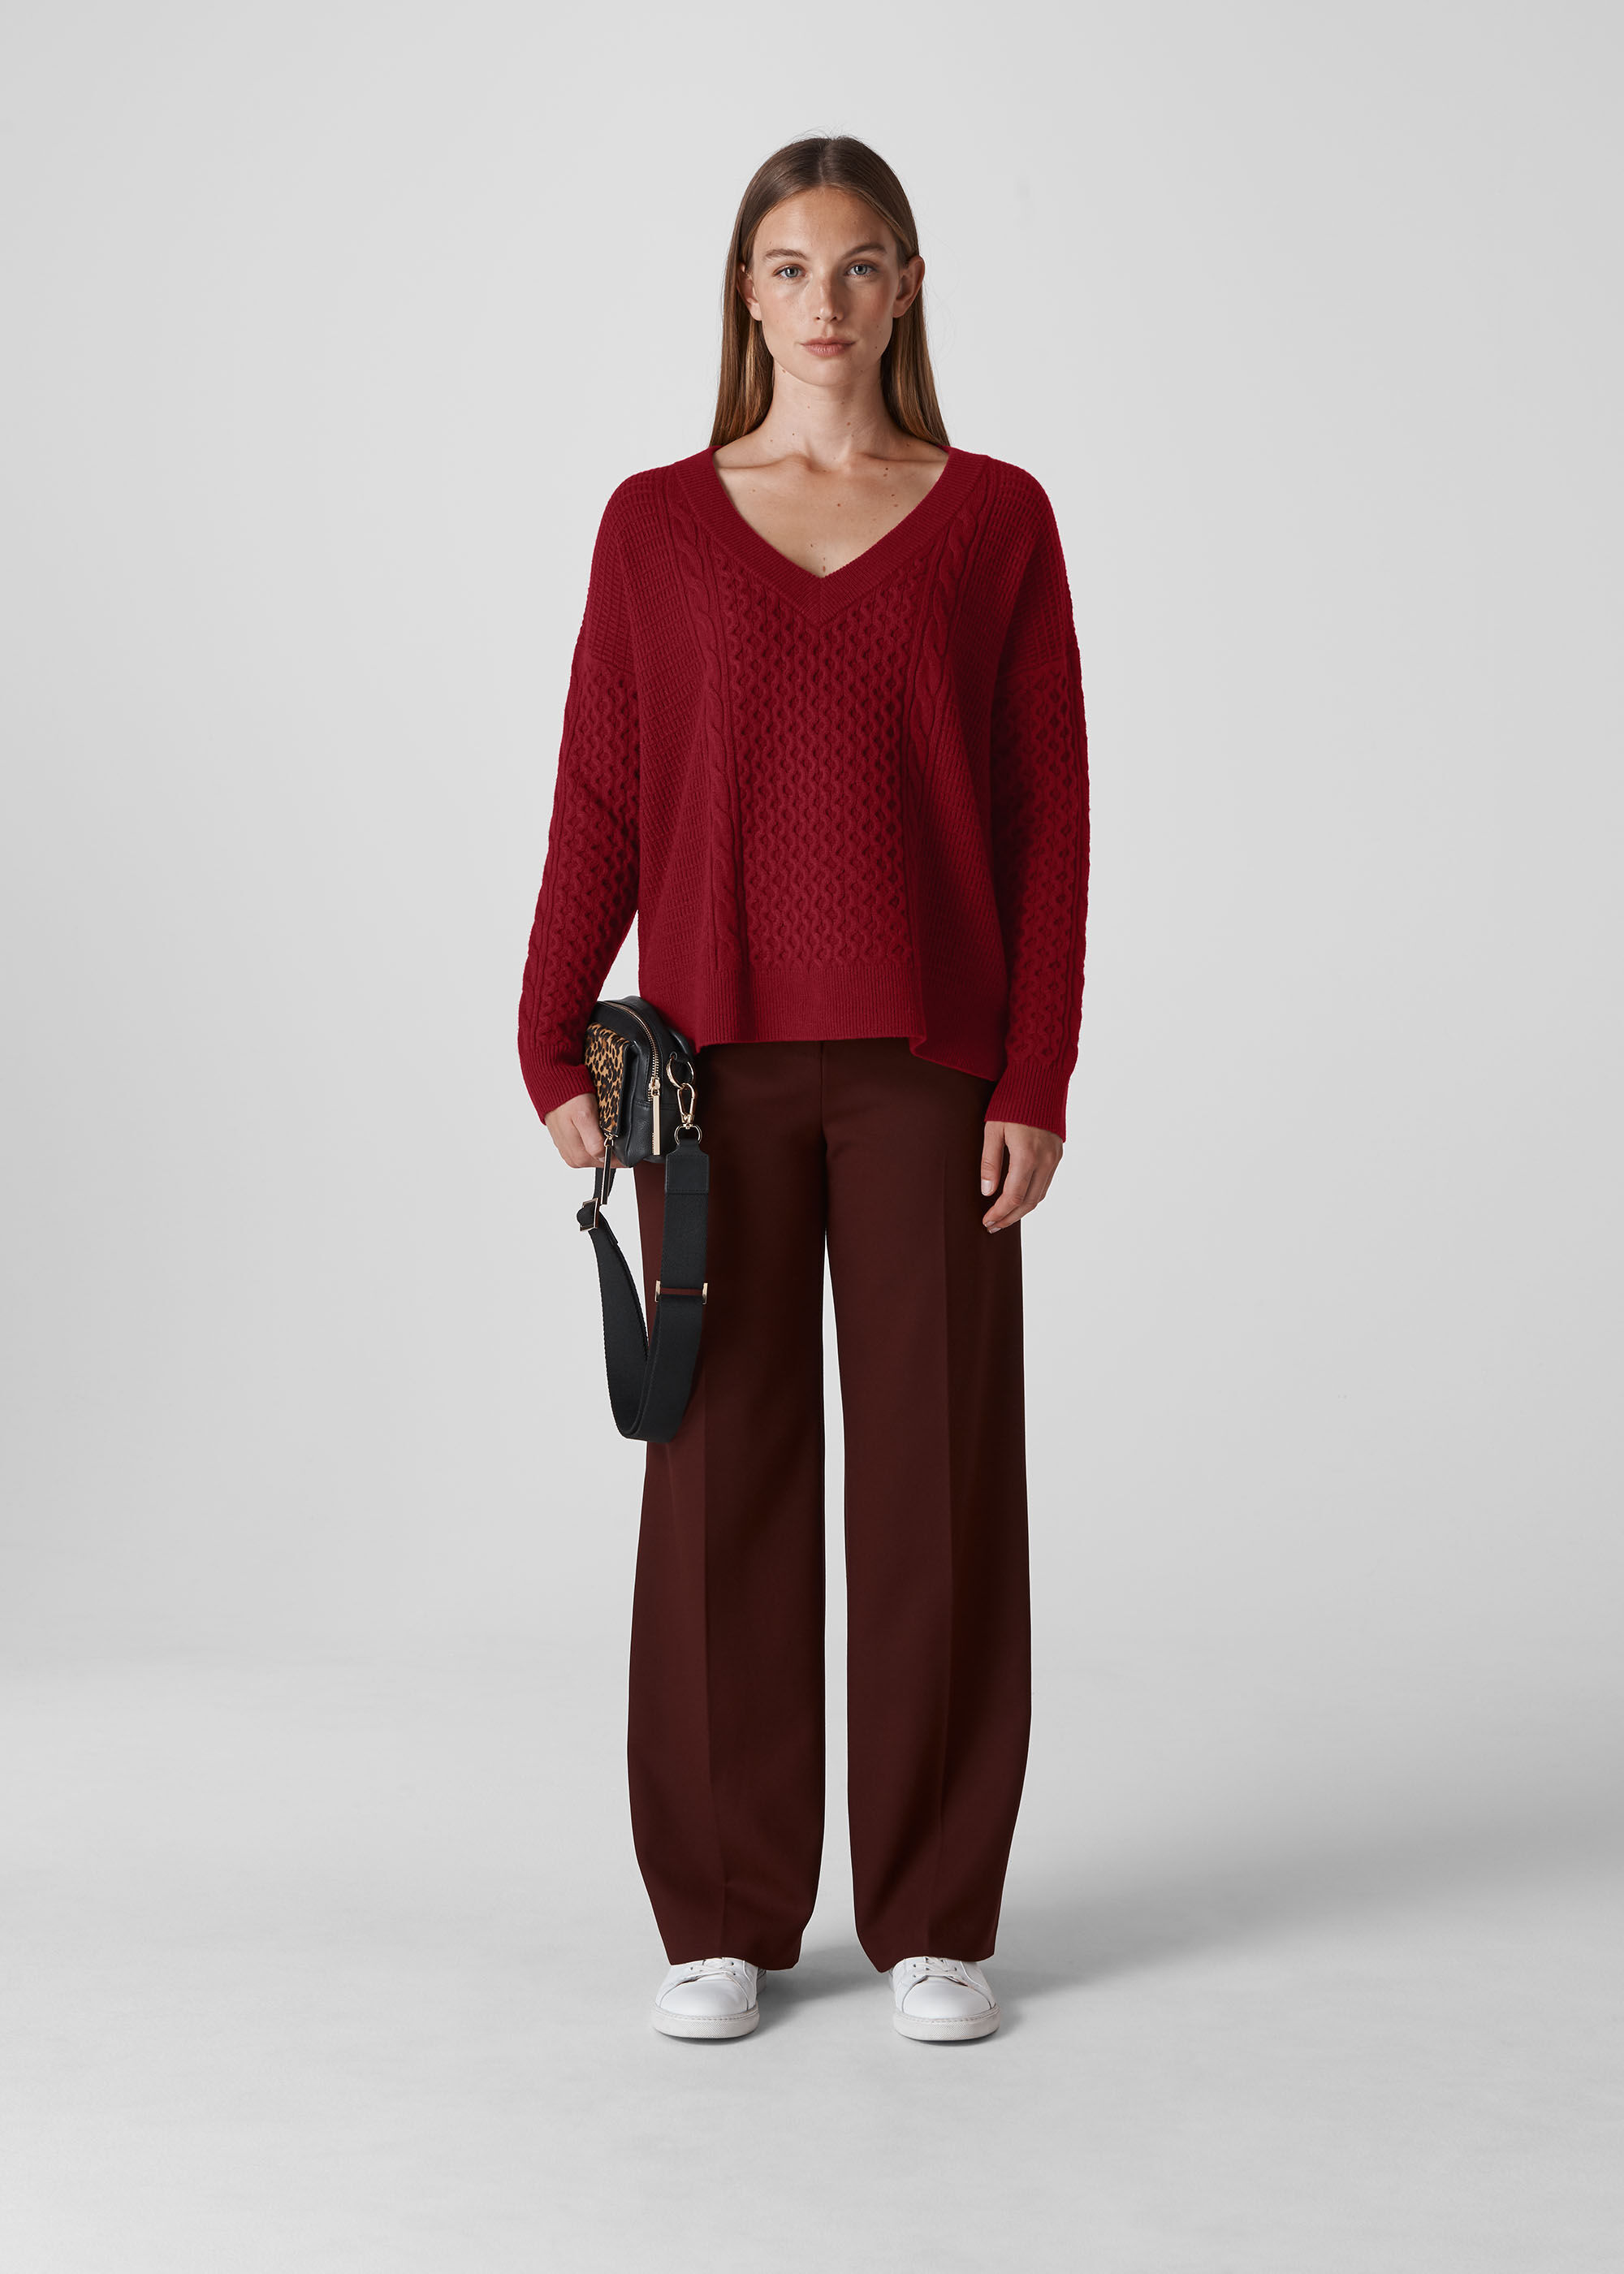 Red Cable V Neck Knit | WHISTLES |